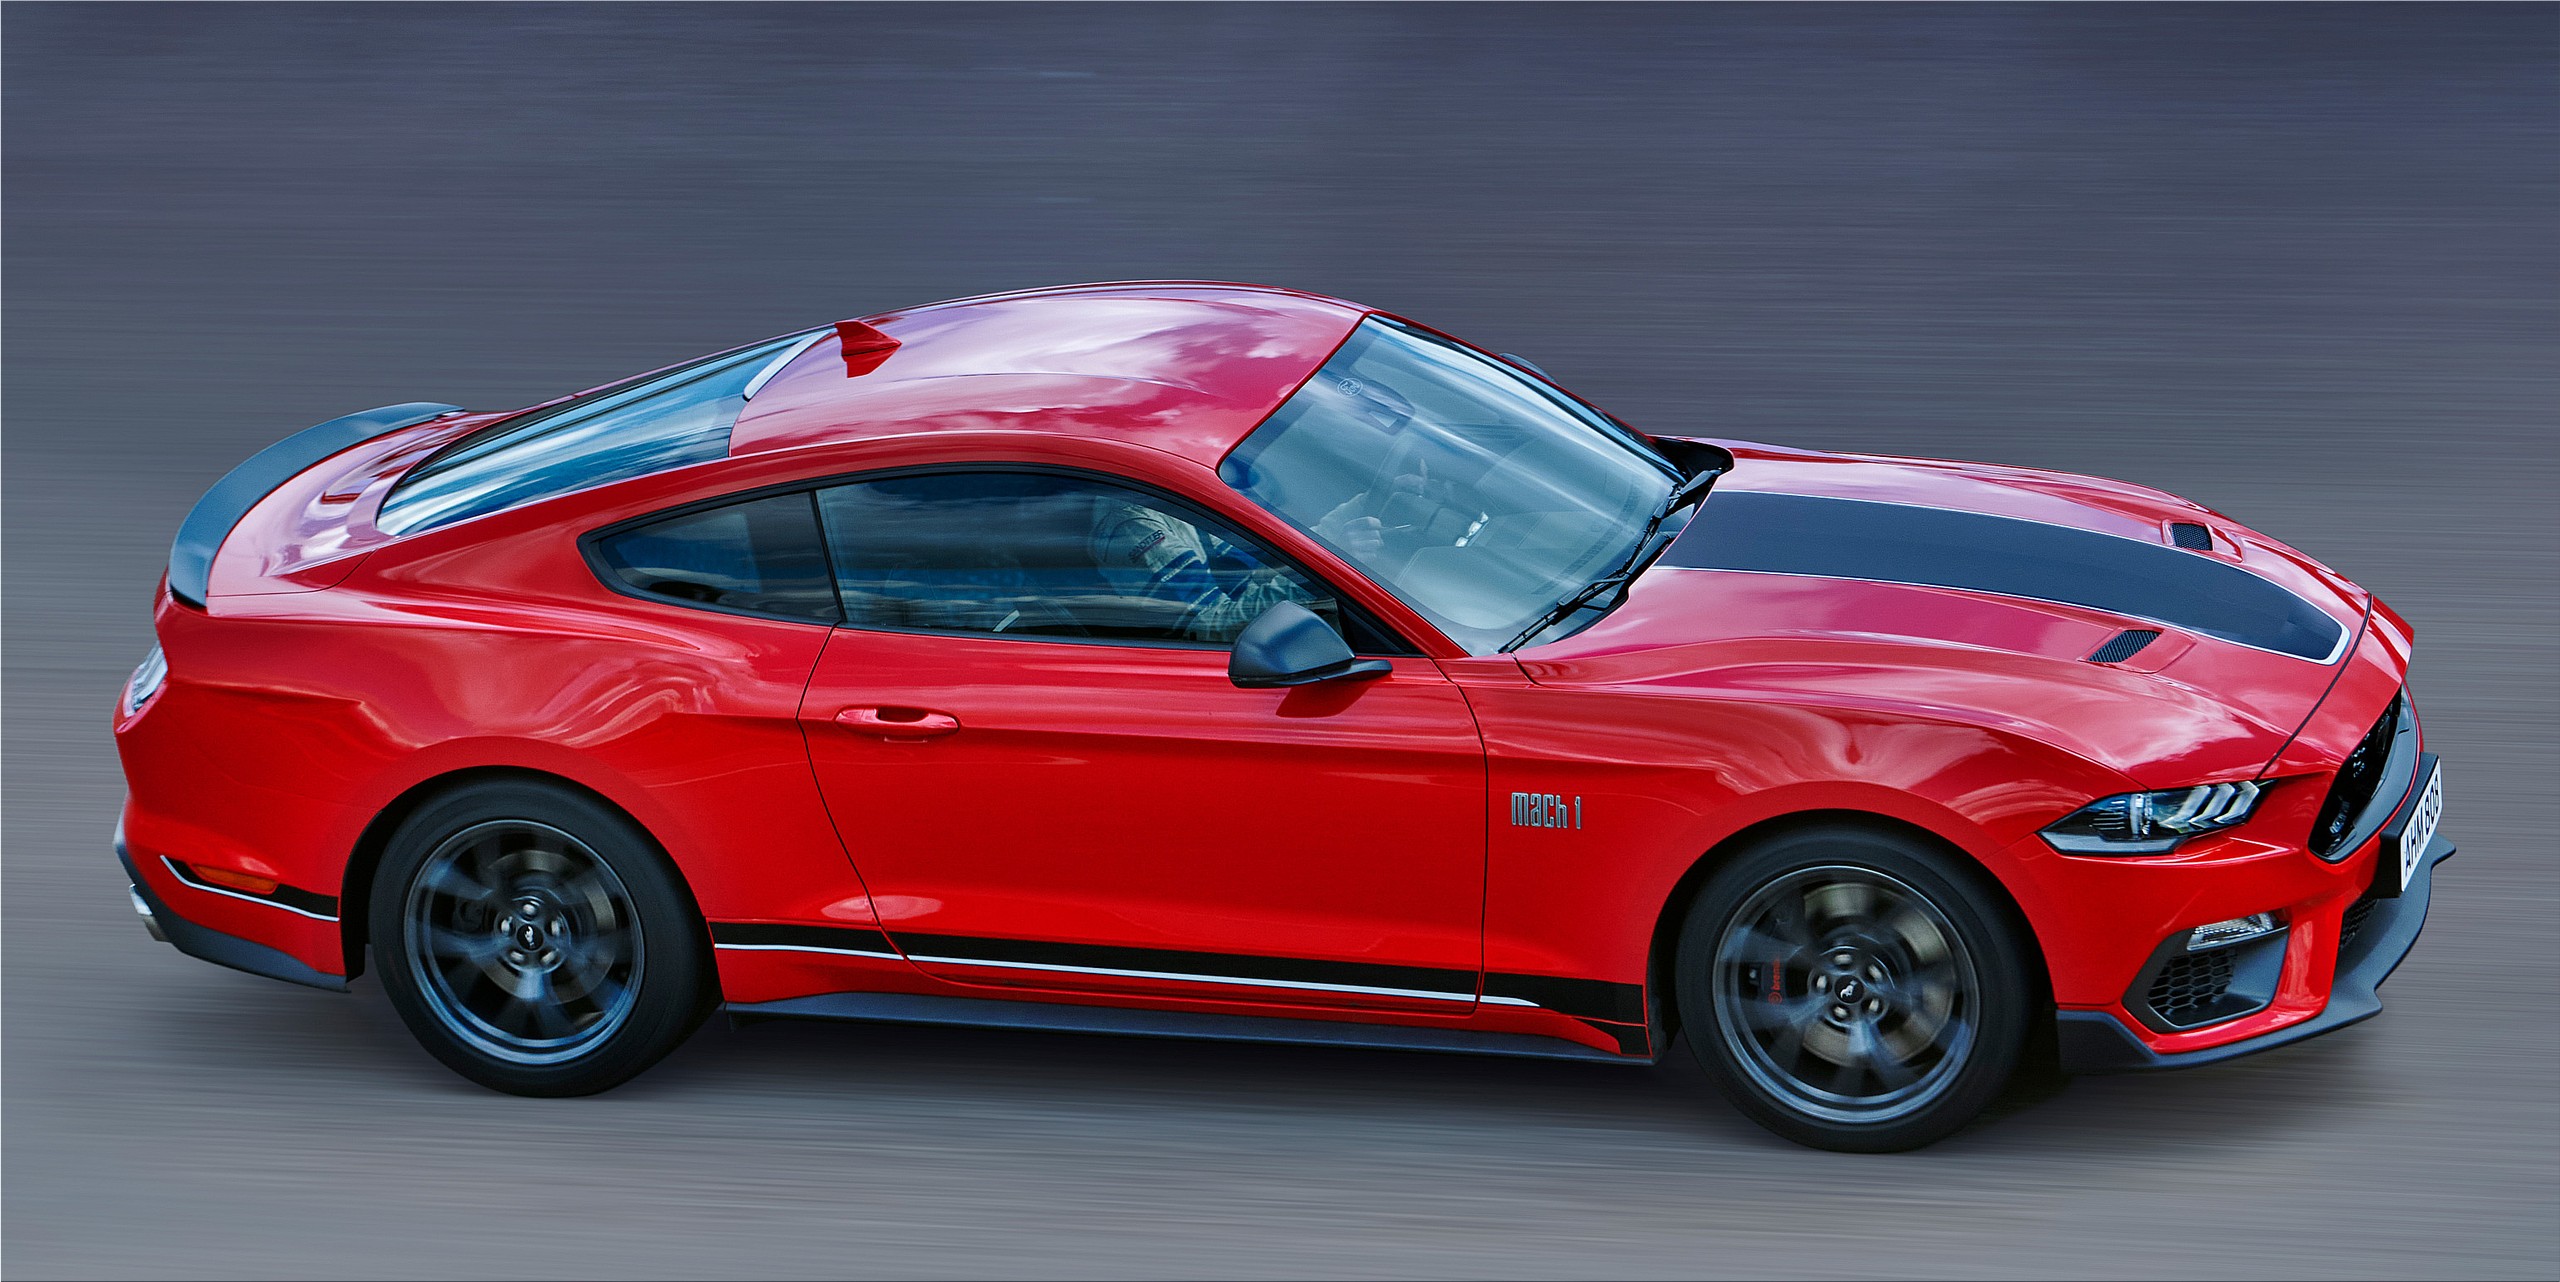 The New Ford Mustang Mach 1 Sports Car With 460 Hp From 92000 Euros